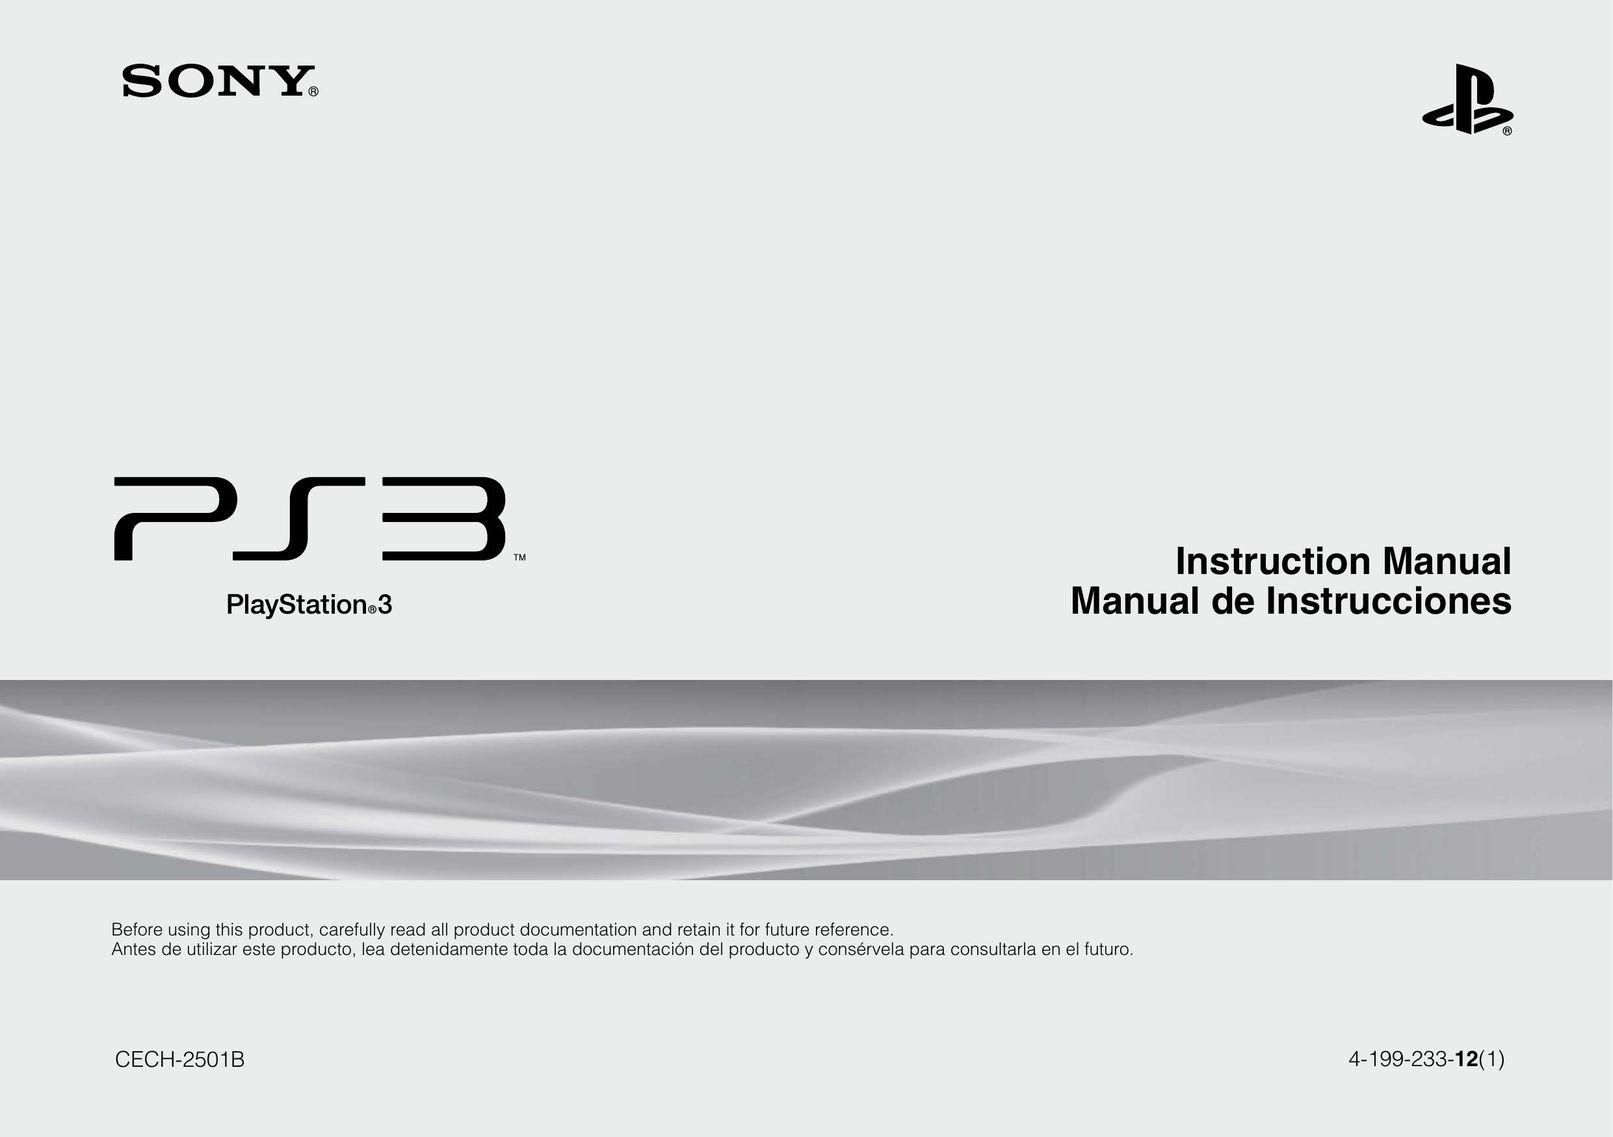 Sony 99154 Video Game Console User Manual